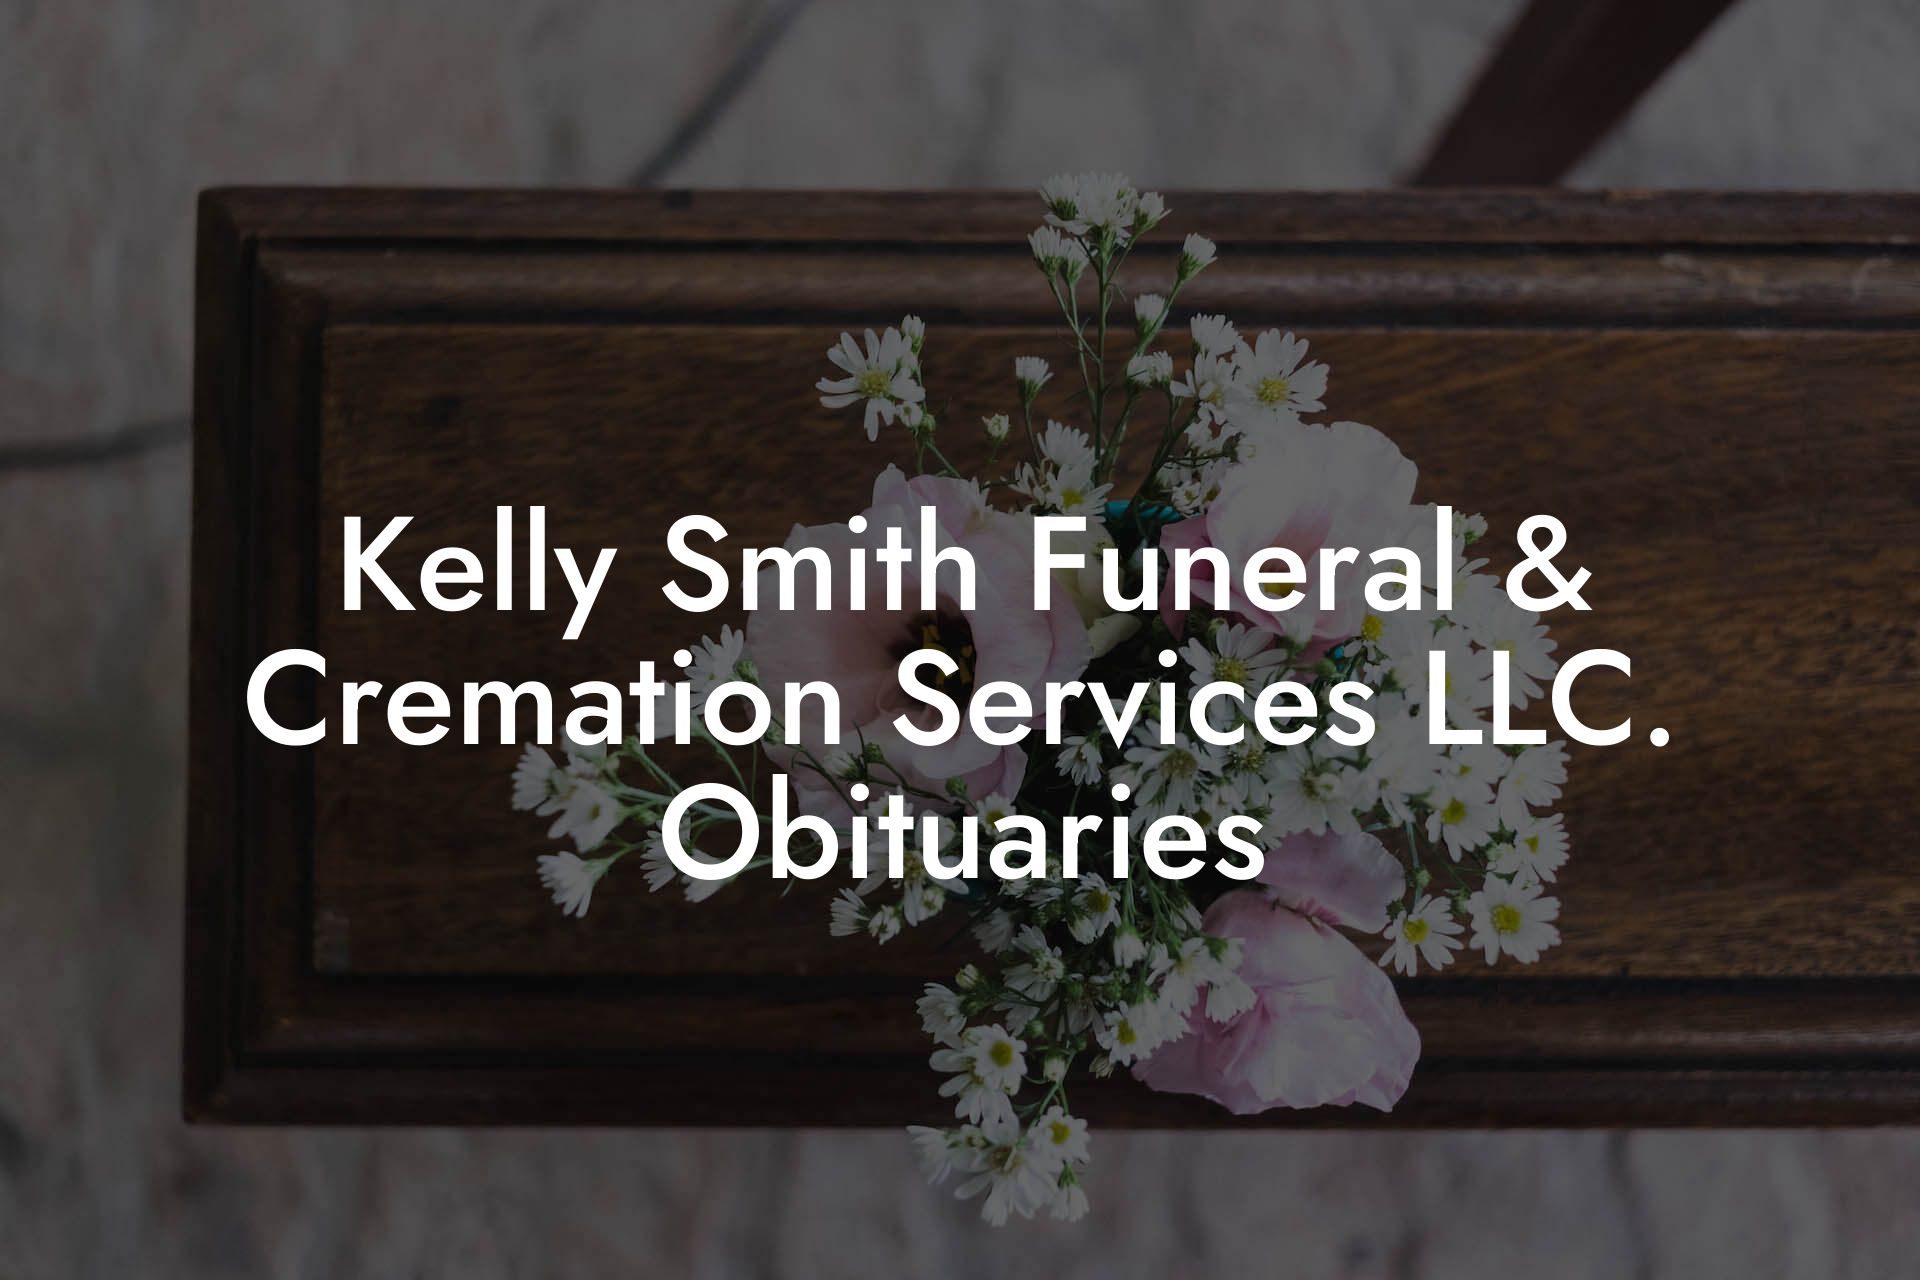 Kelly Smith Funeral & Cremation Services LLC. Obituaries